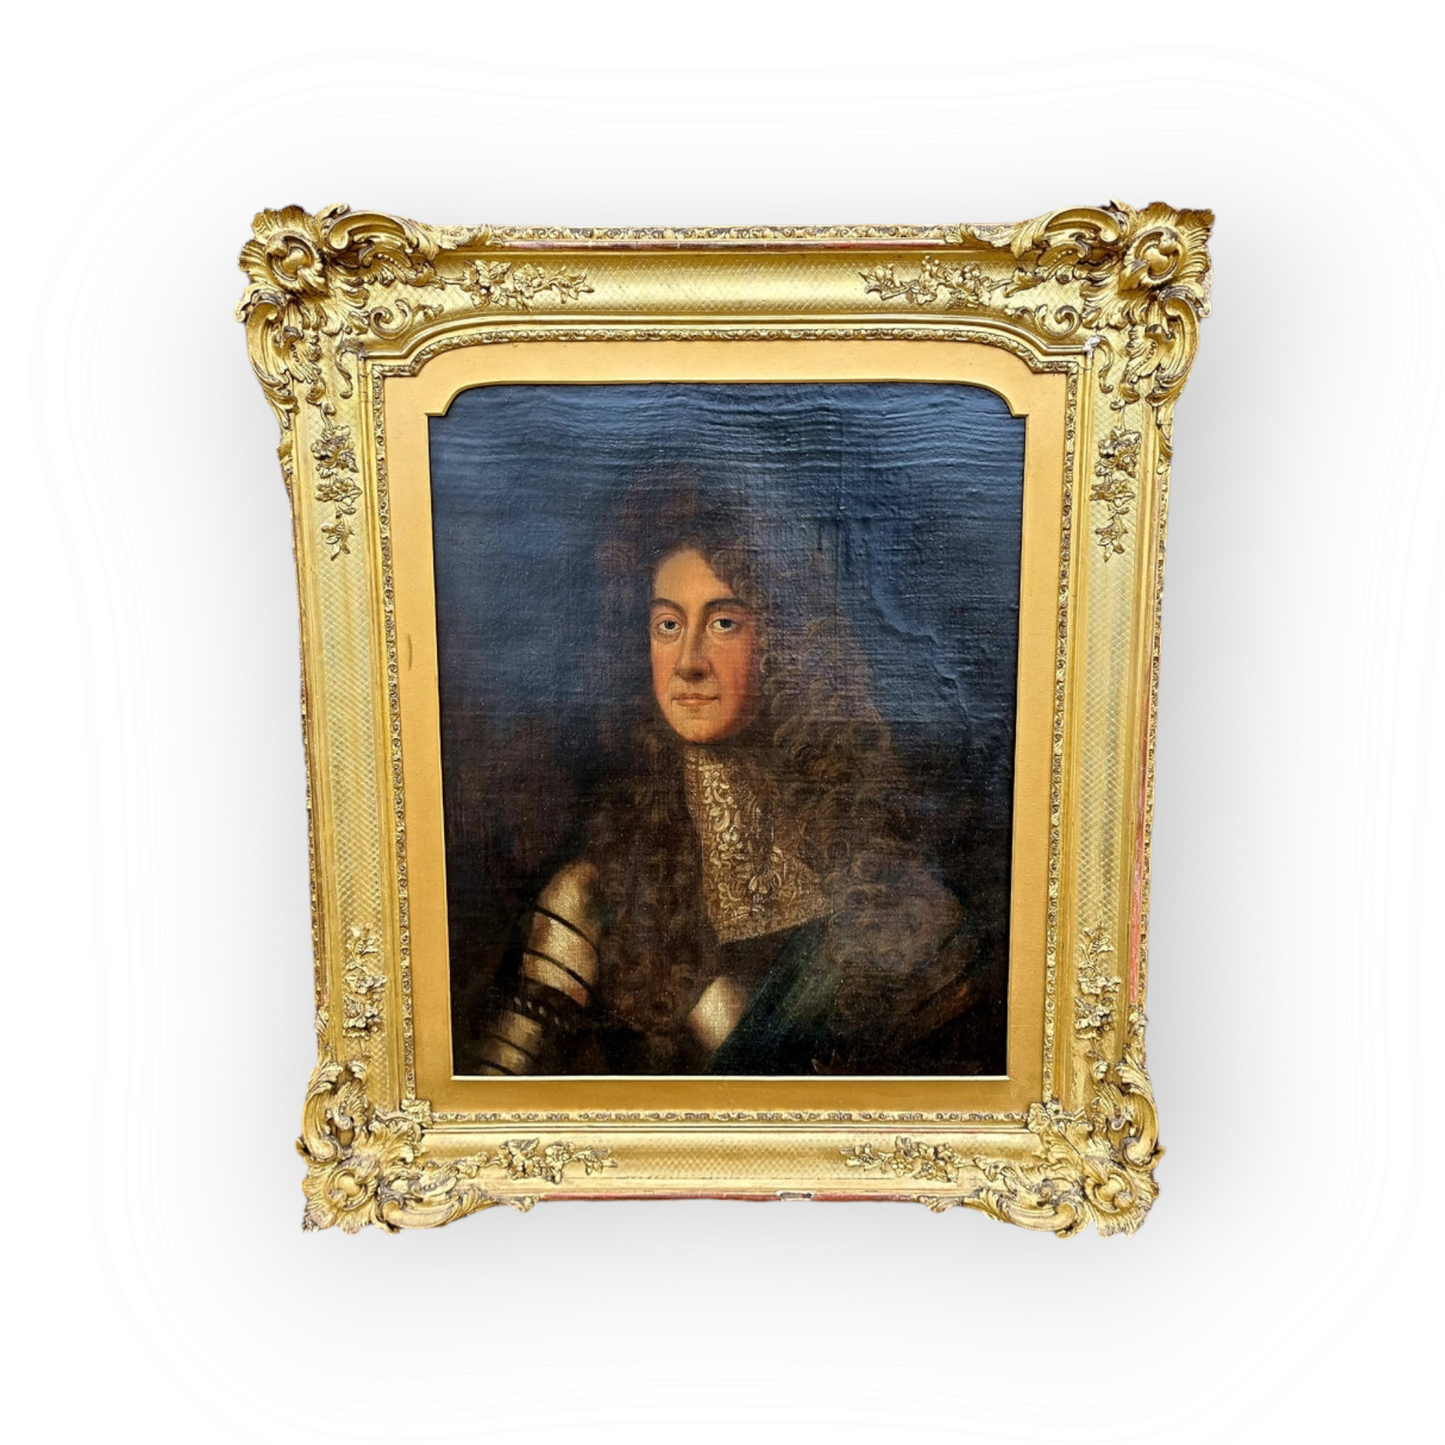 Follower of Sir Godfrey Kneller, A Late 17th Century English School Oil on Canvas Portrait of King James II of England (1633-1701)